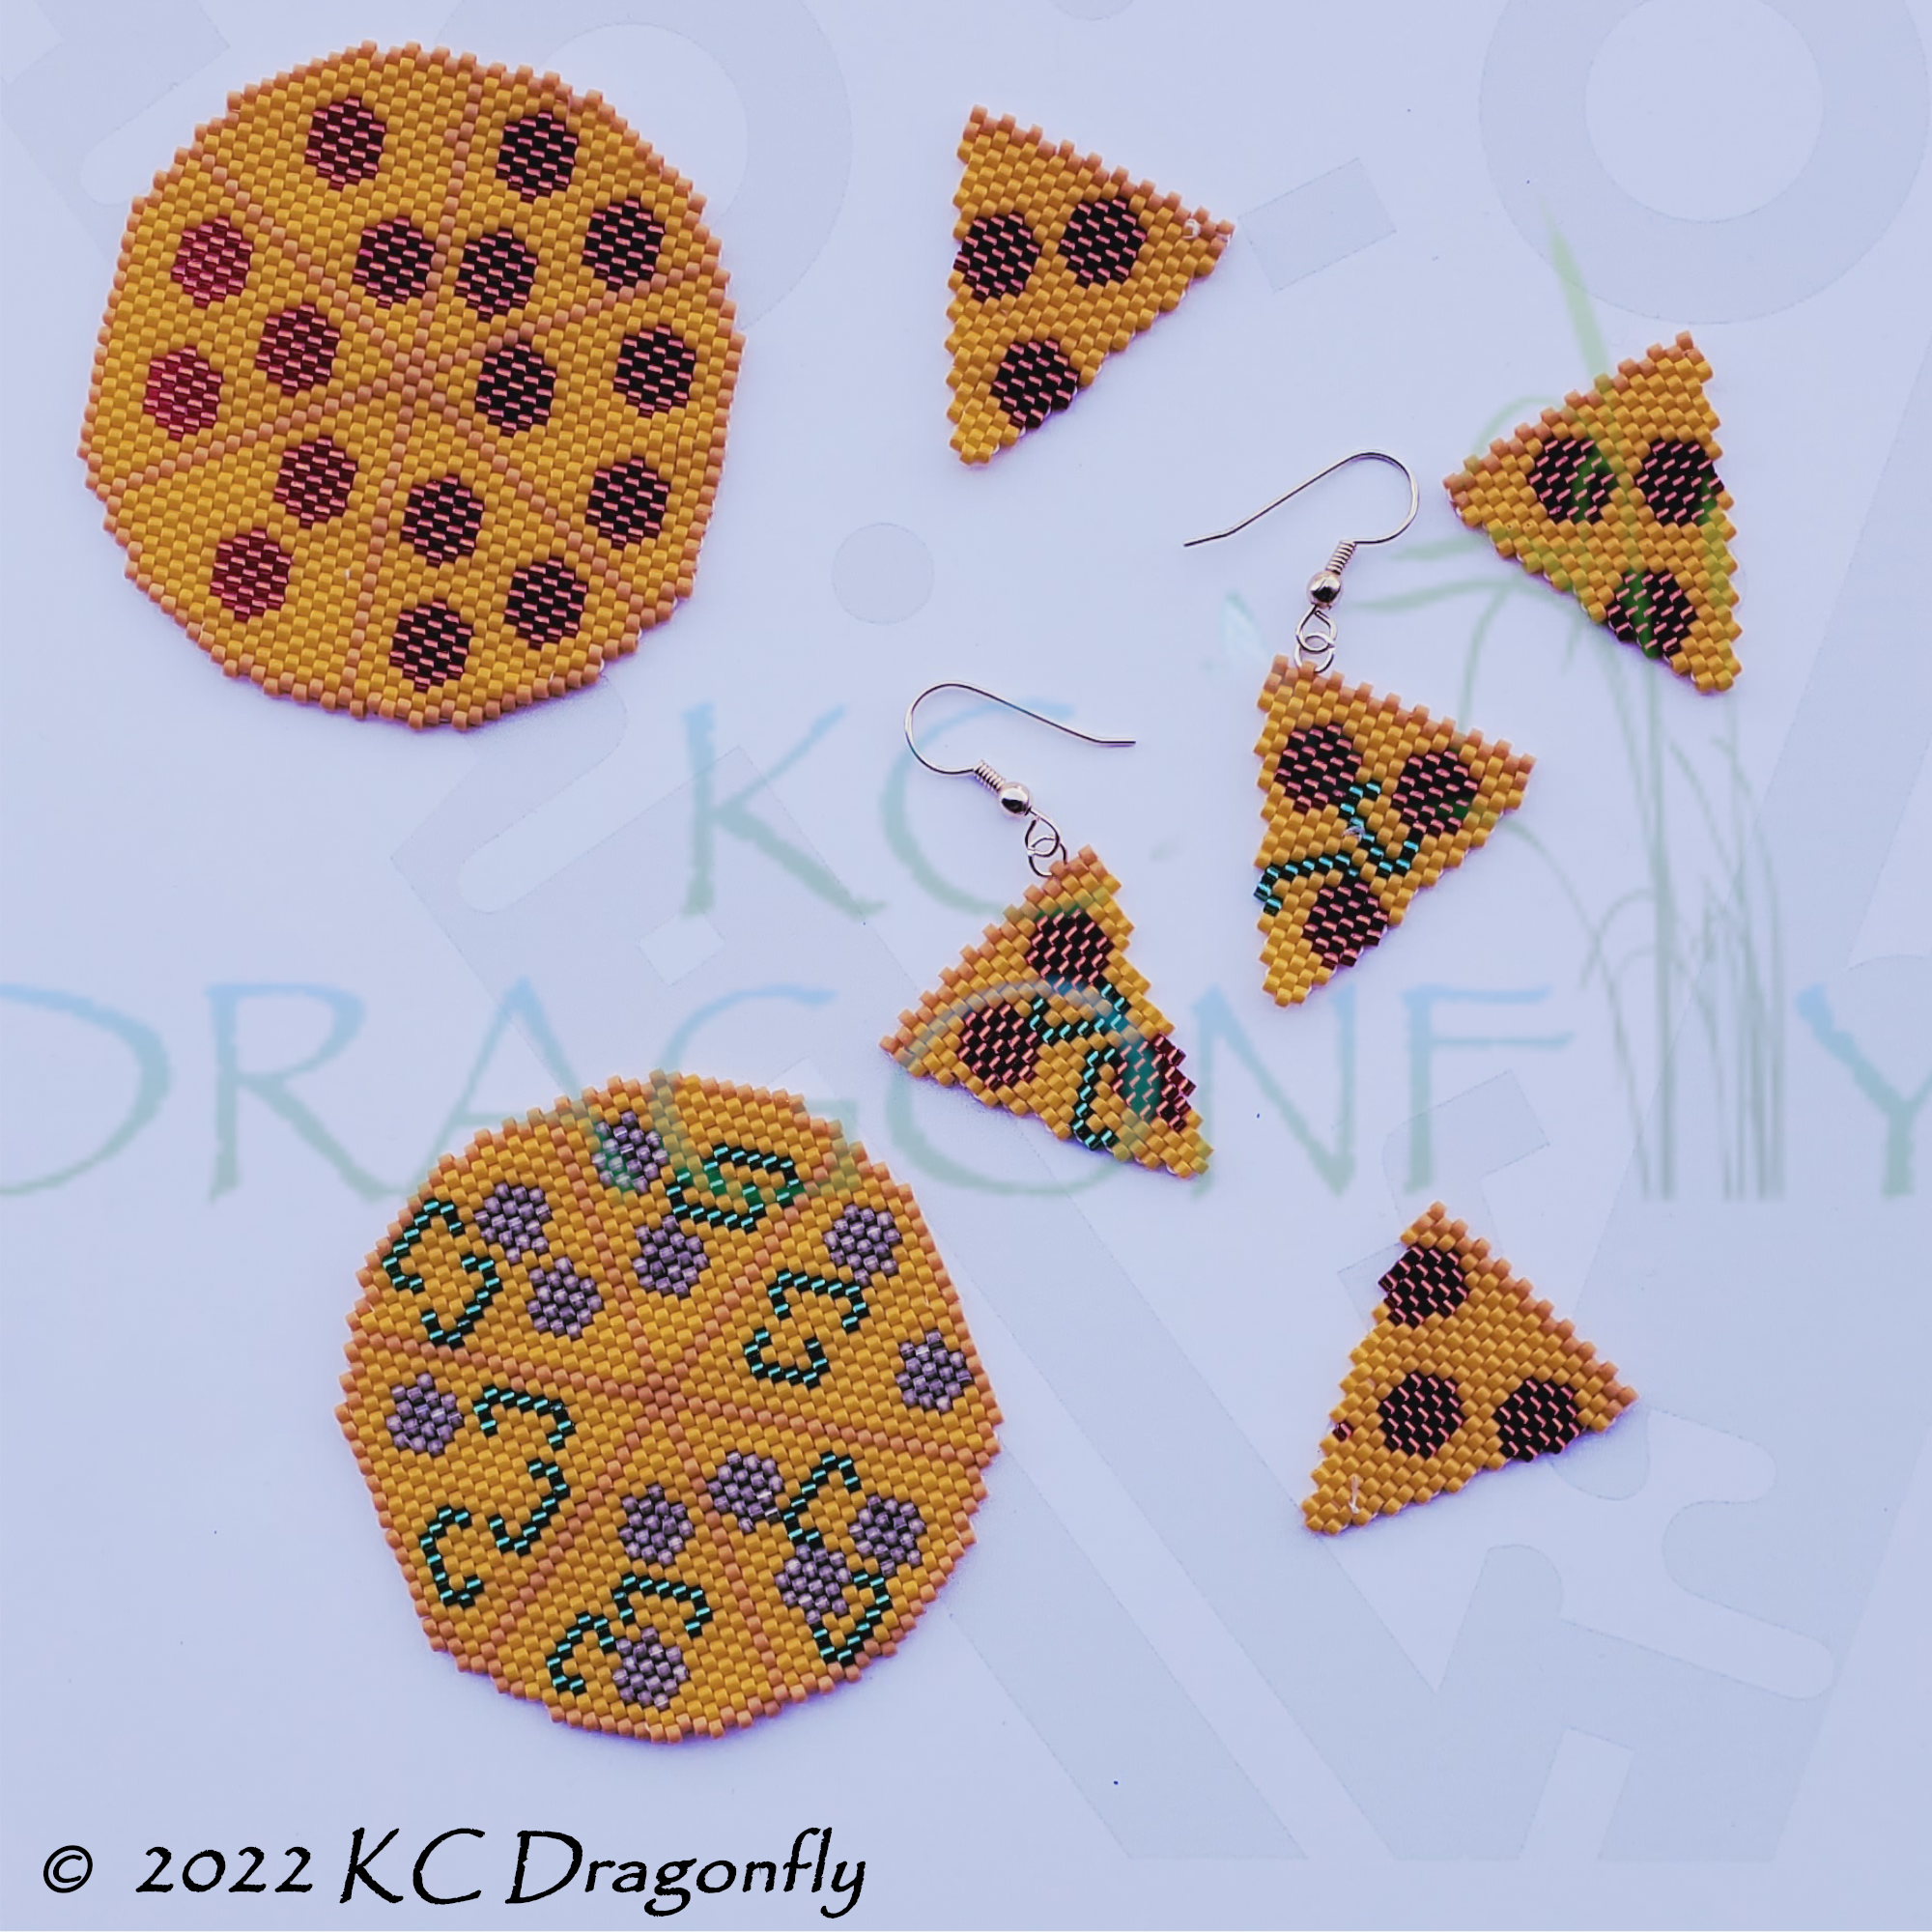 KC Dragonfly Peyote Stitch Pizza Pies and Slices